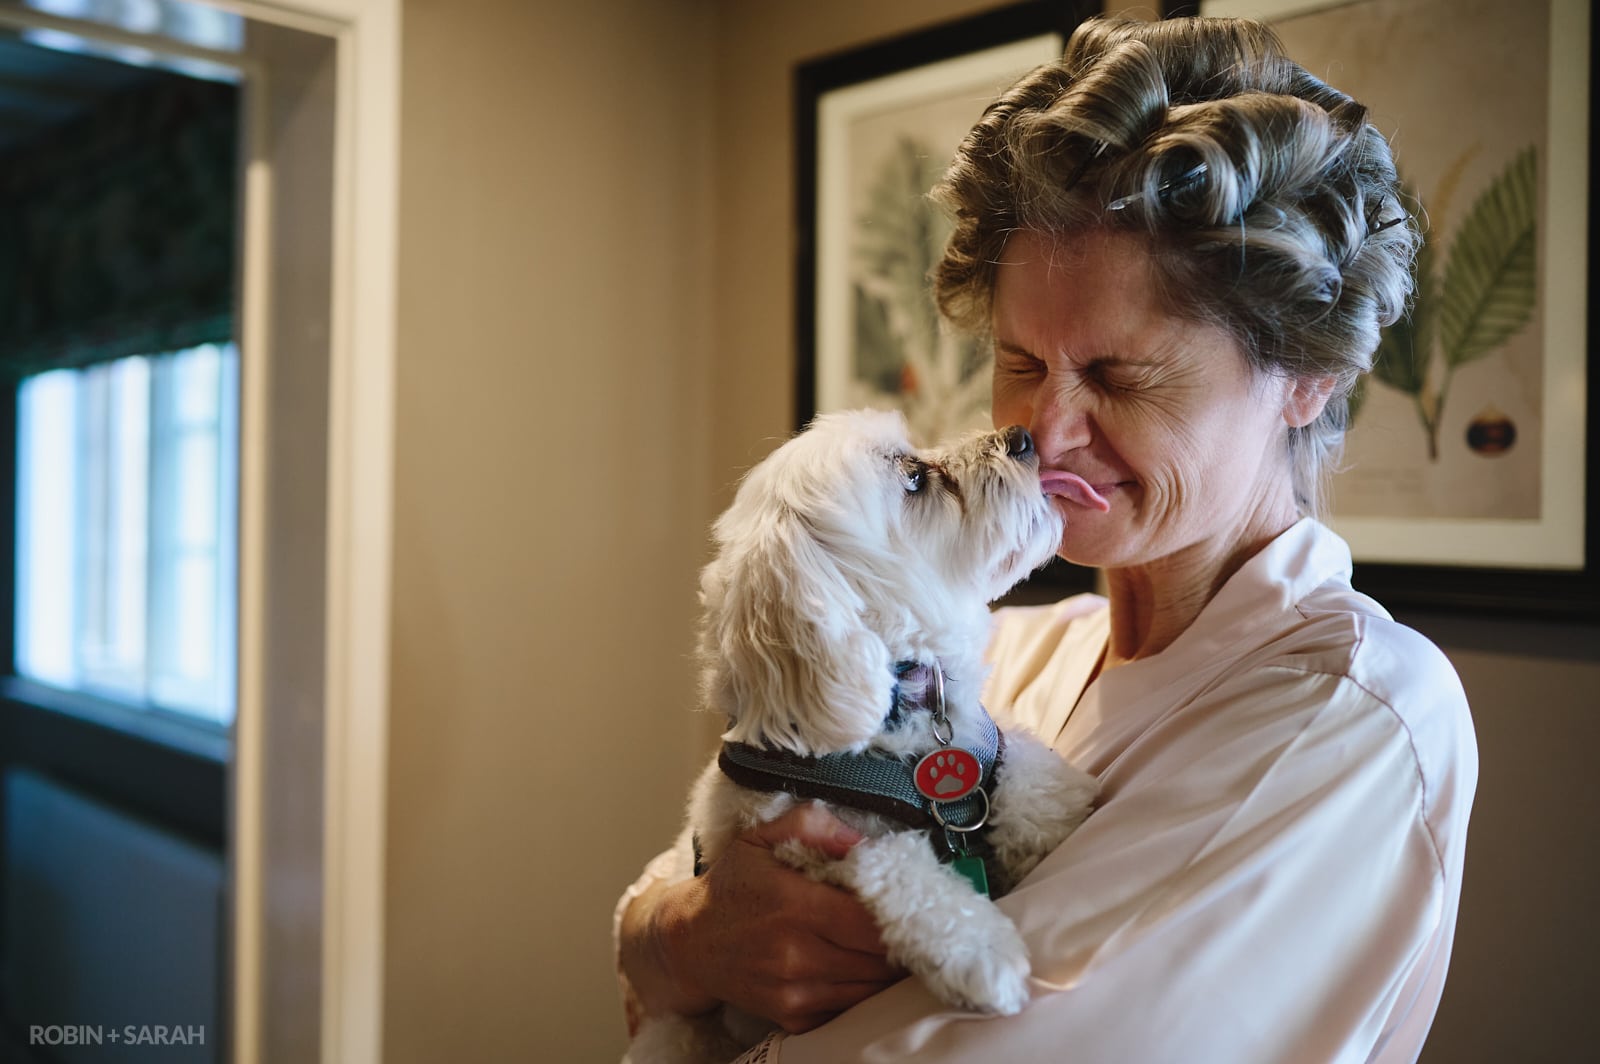 Bride has her face liked by small dog as she gets ready for wedding